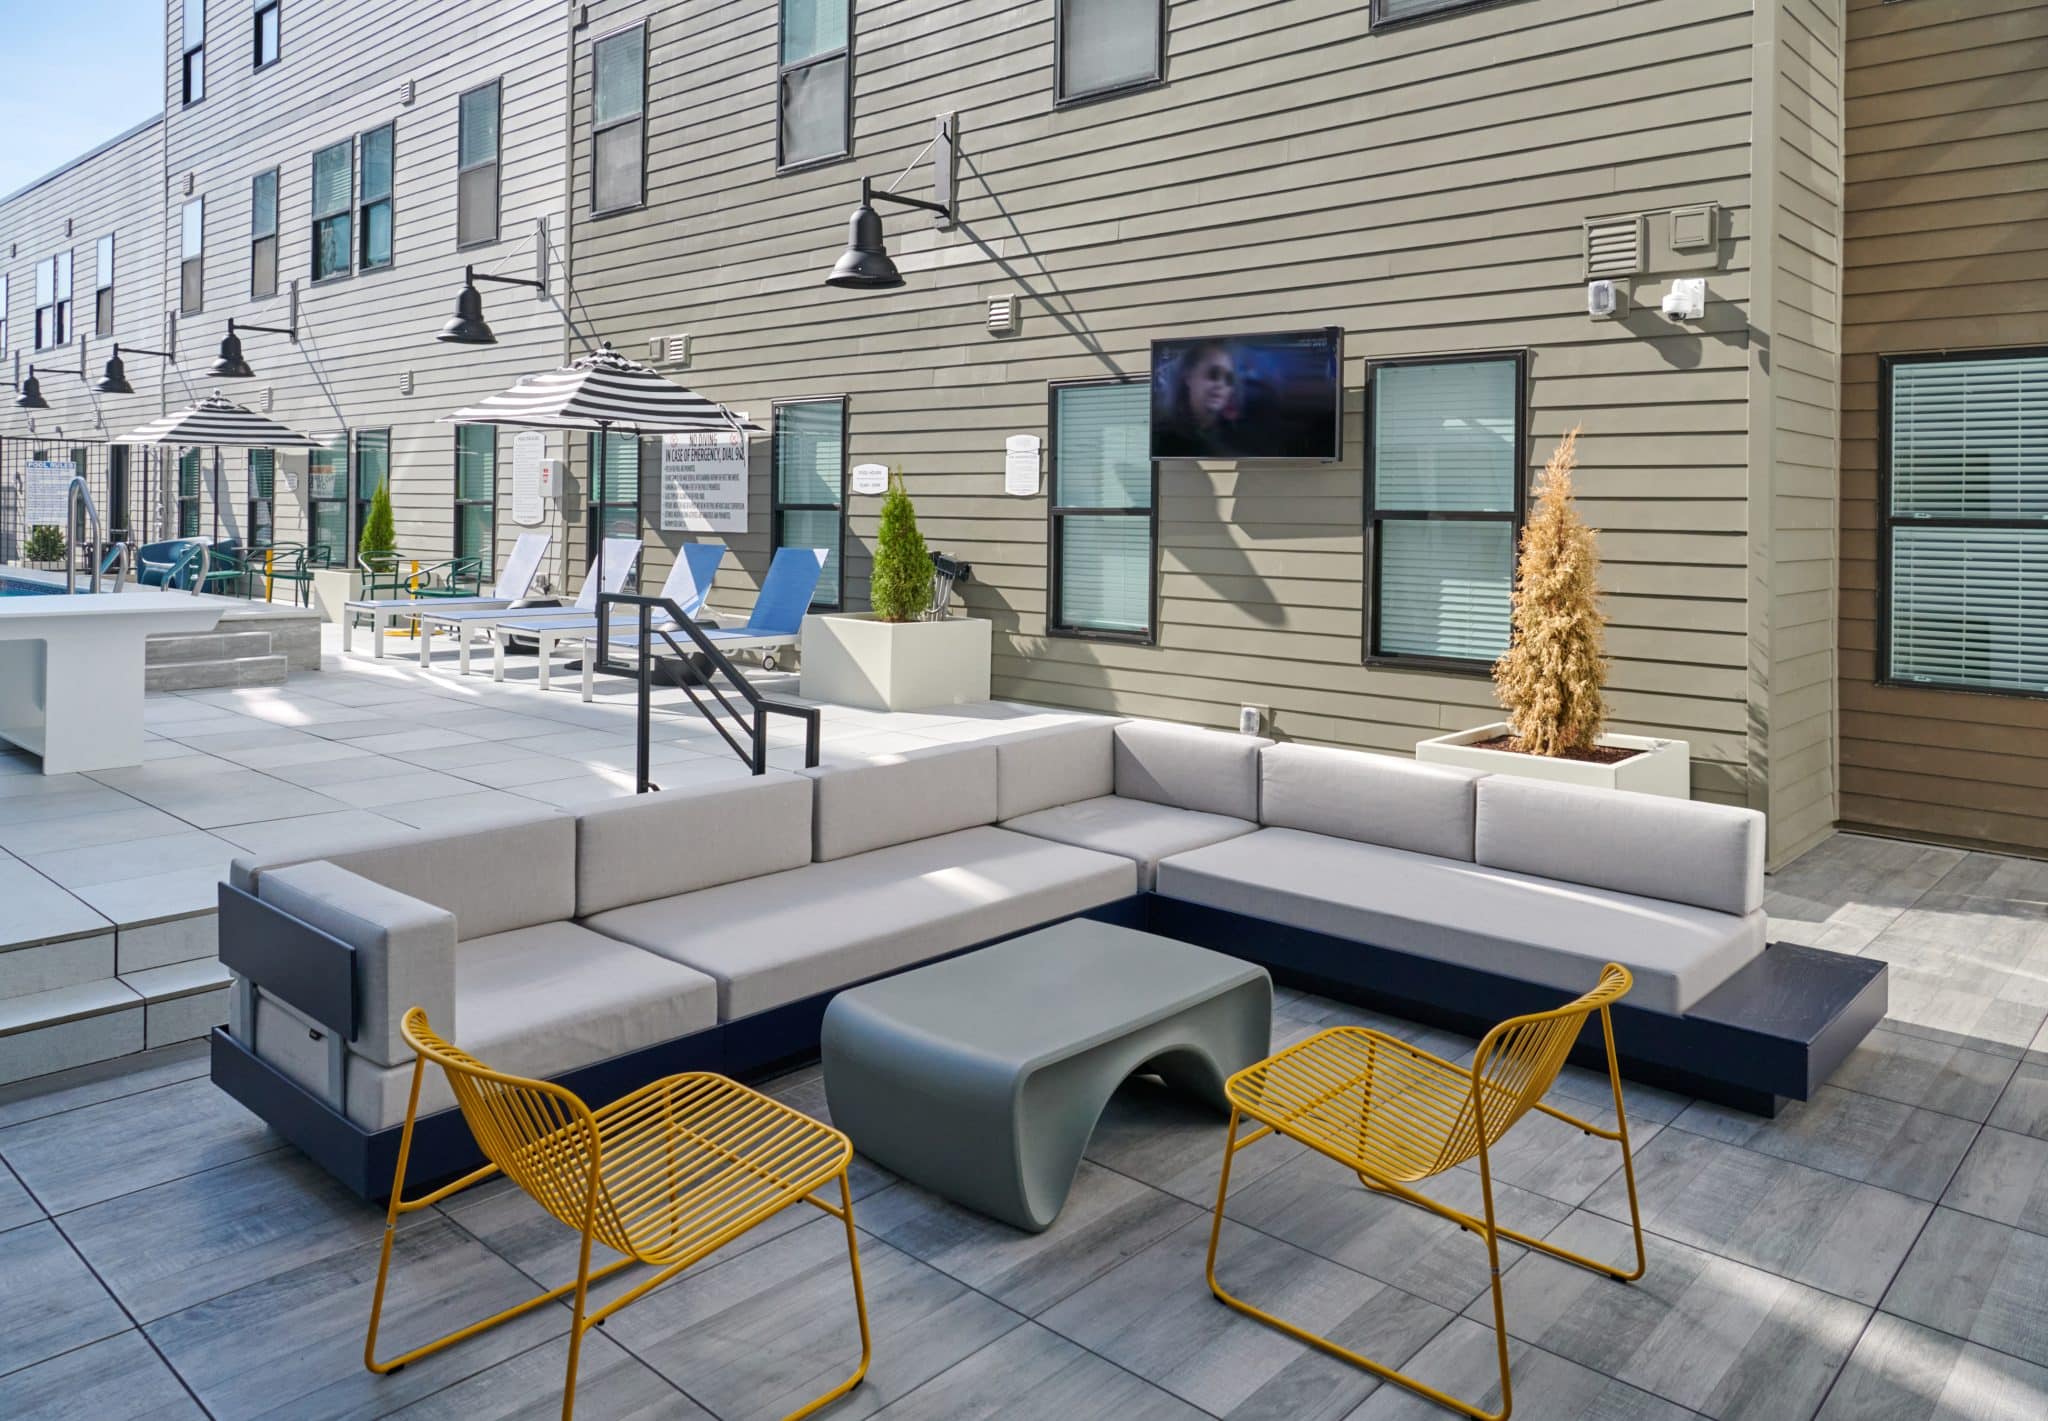 The Verve Columbus student apartments outdoor lounge area by the pool